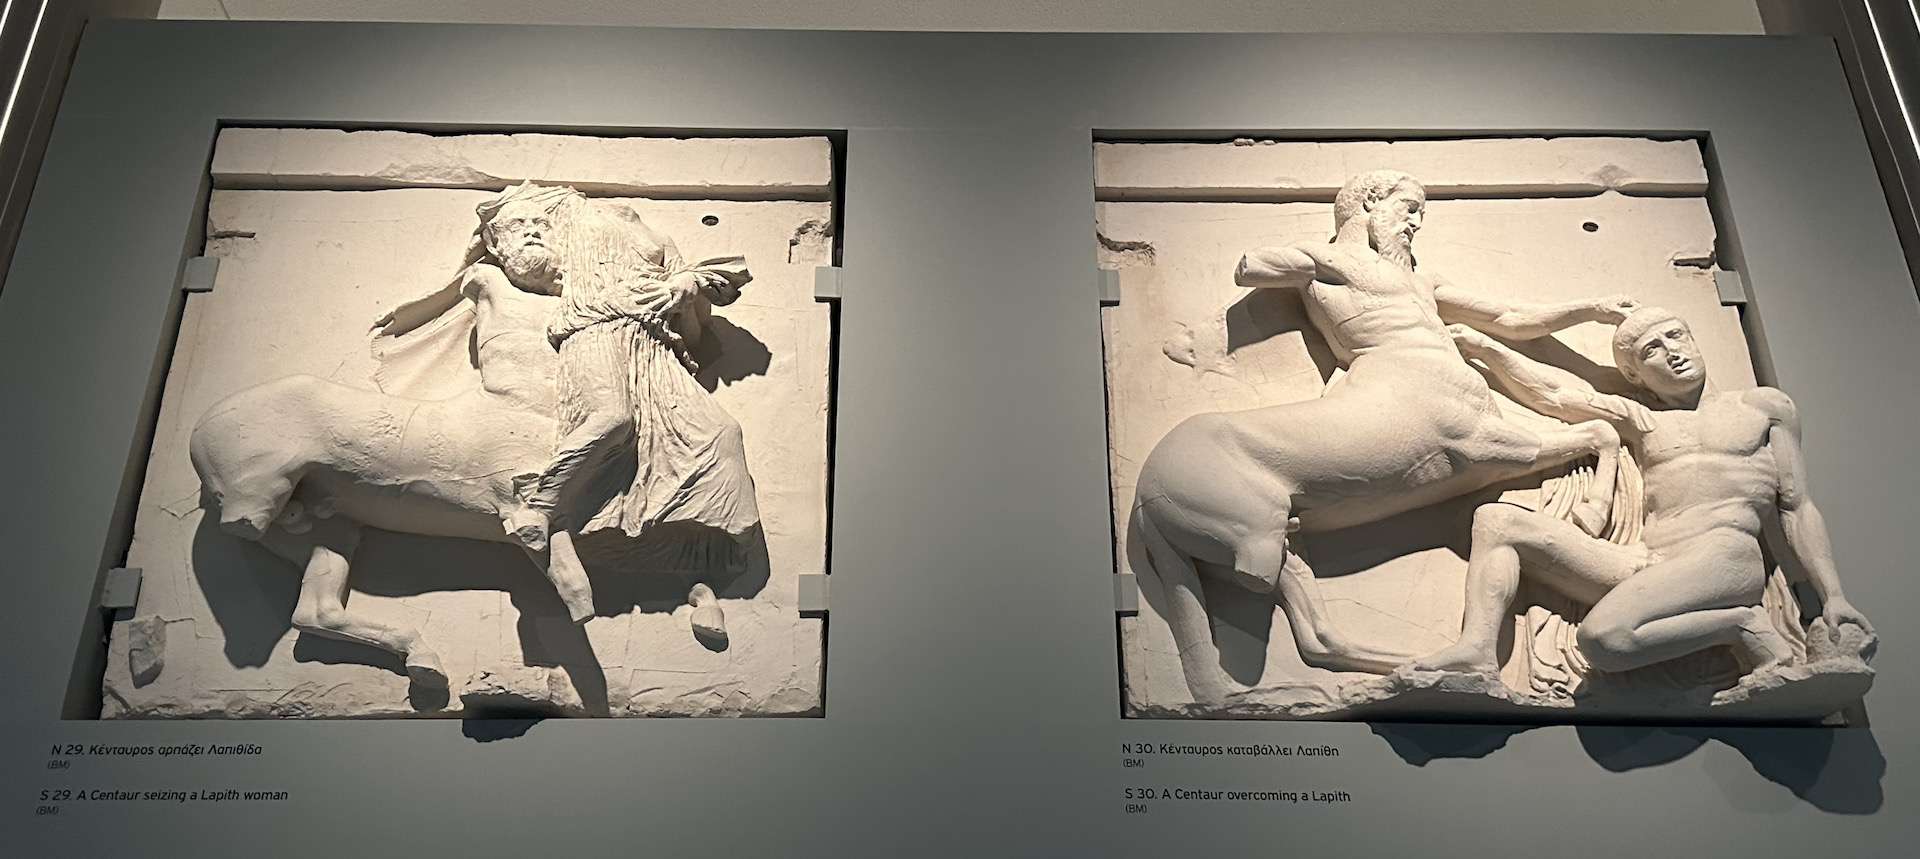 S 29 and S 30 on the south metopes of the Parthenon